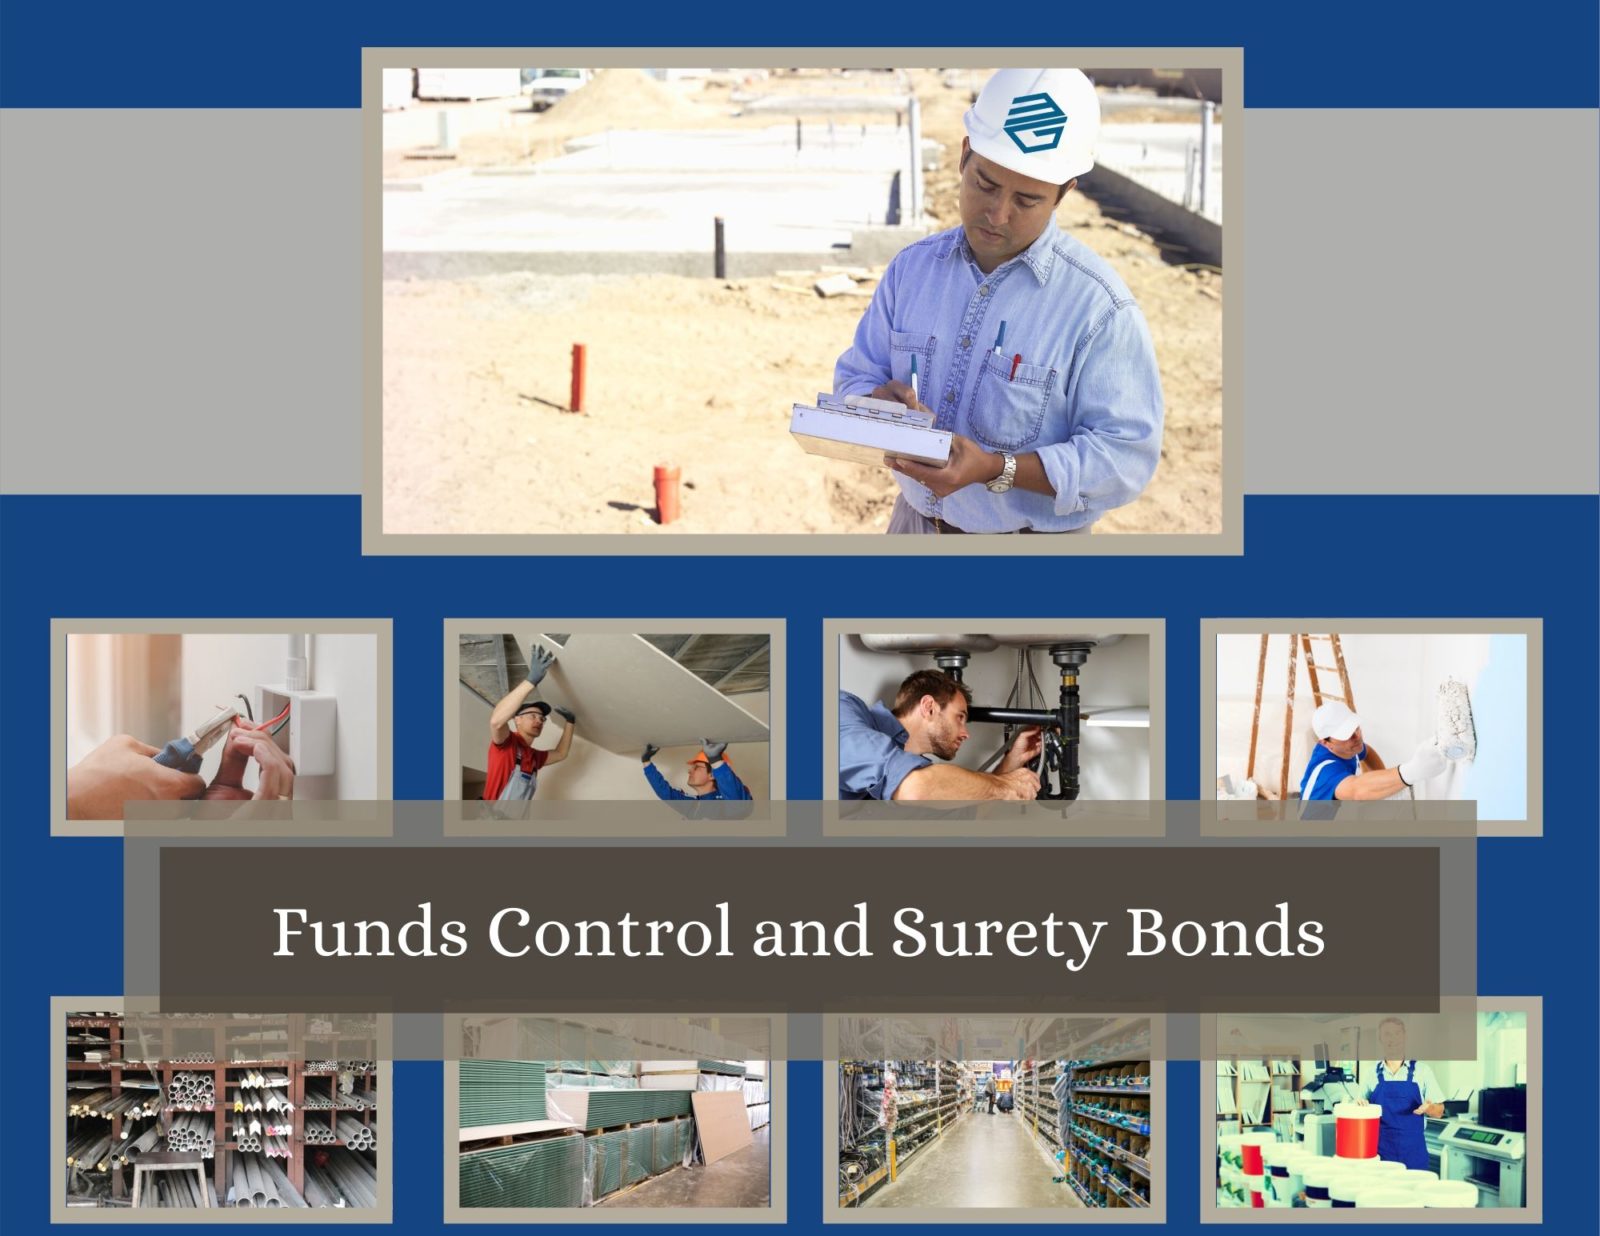 Funds Control And Surety Bonding The Good And Bad